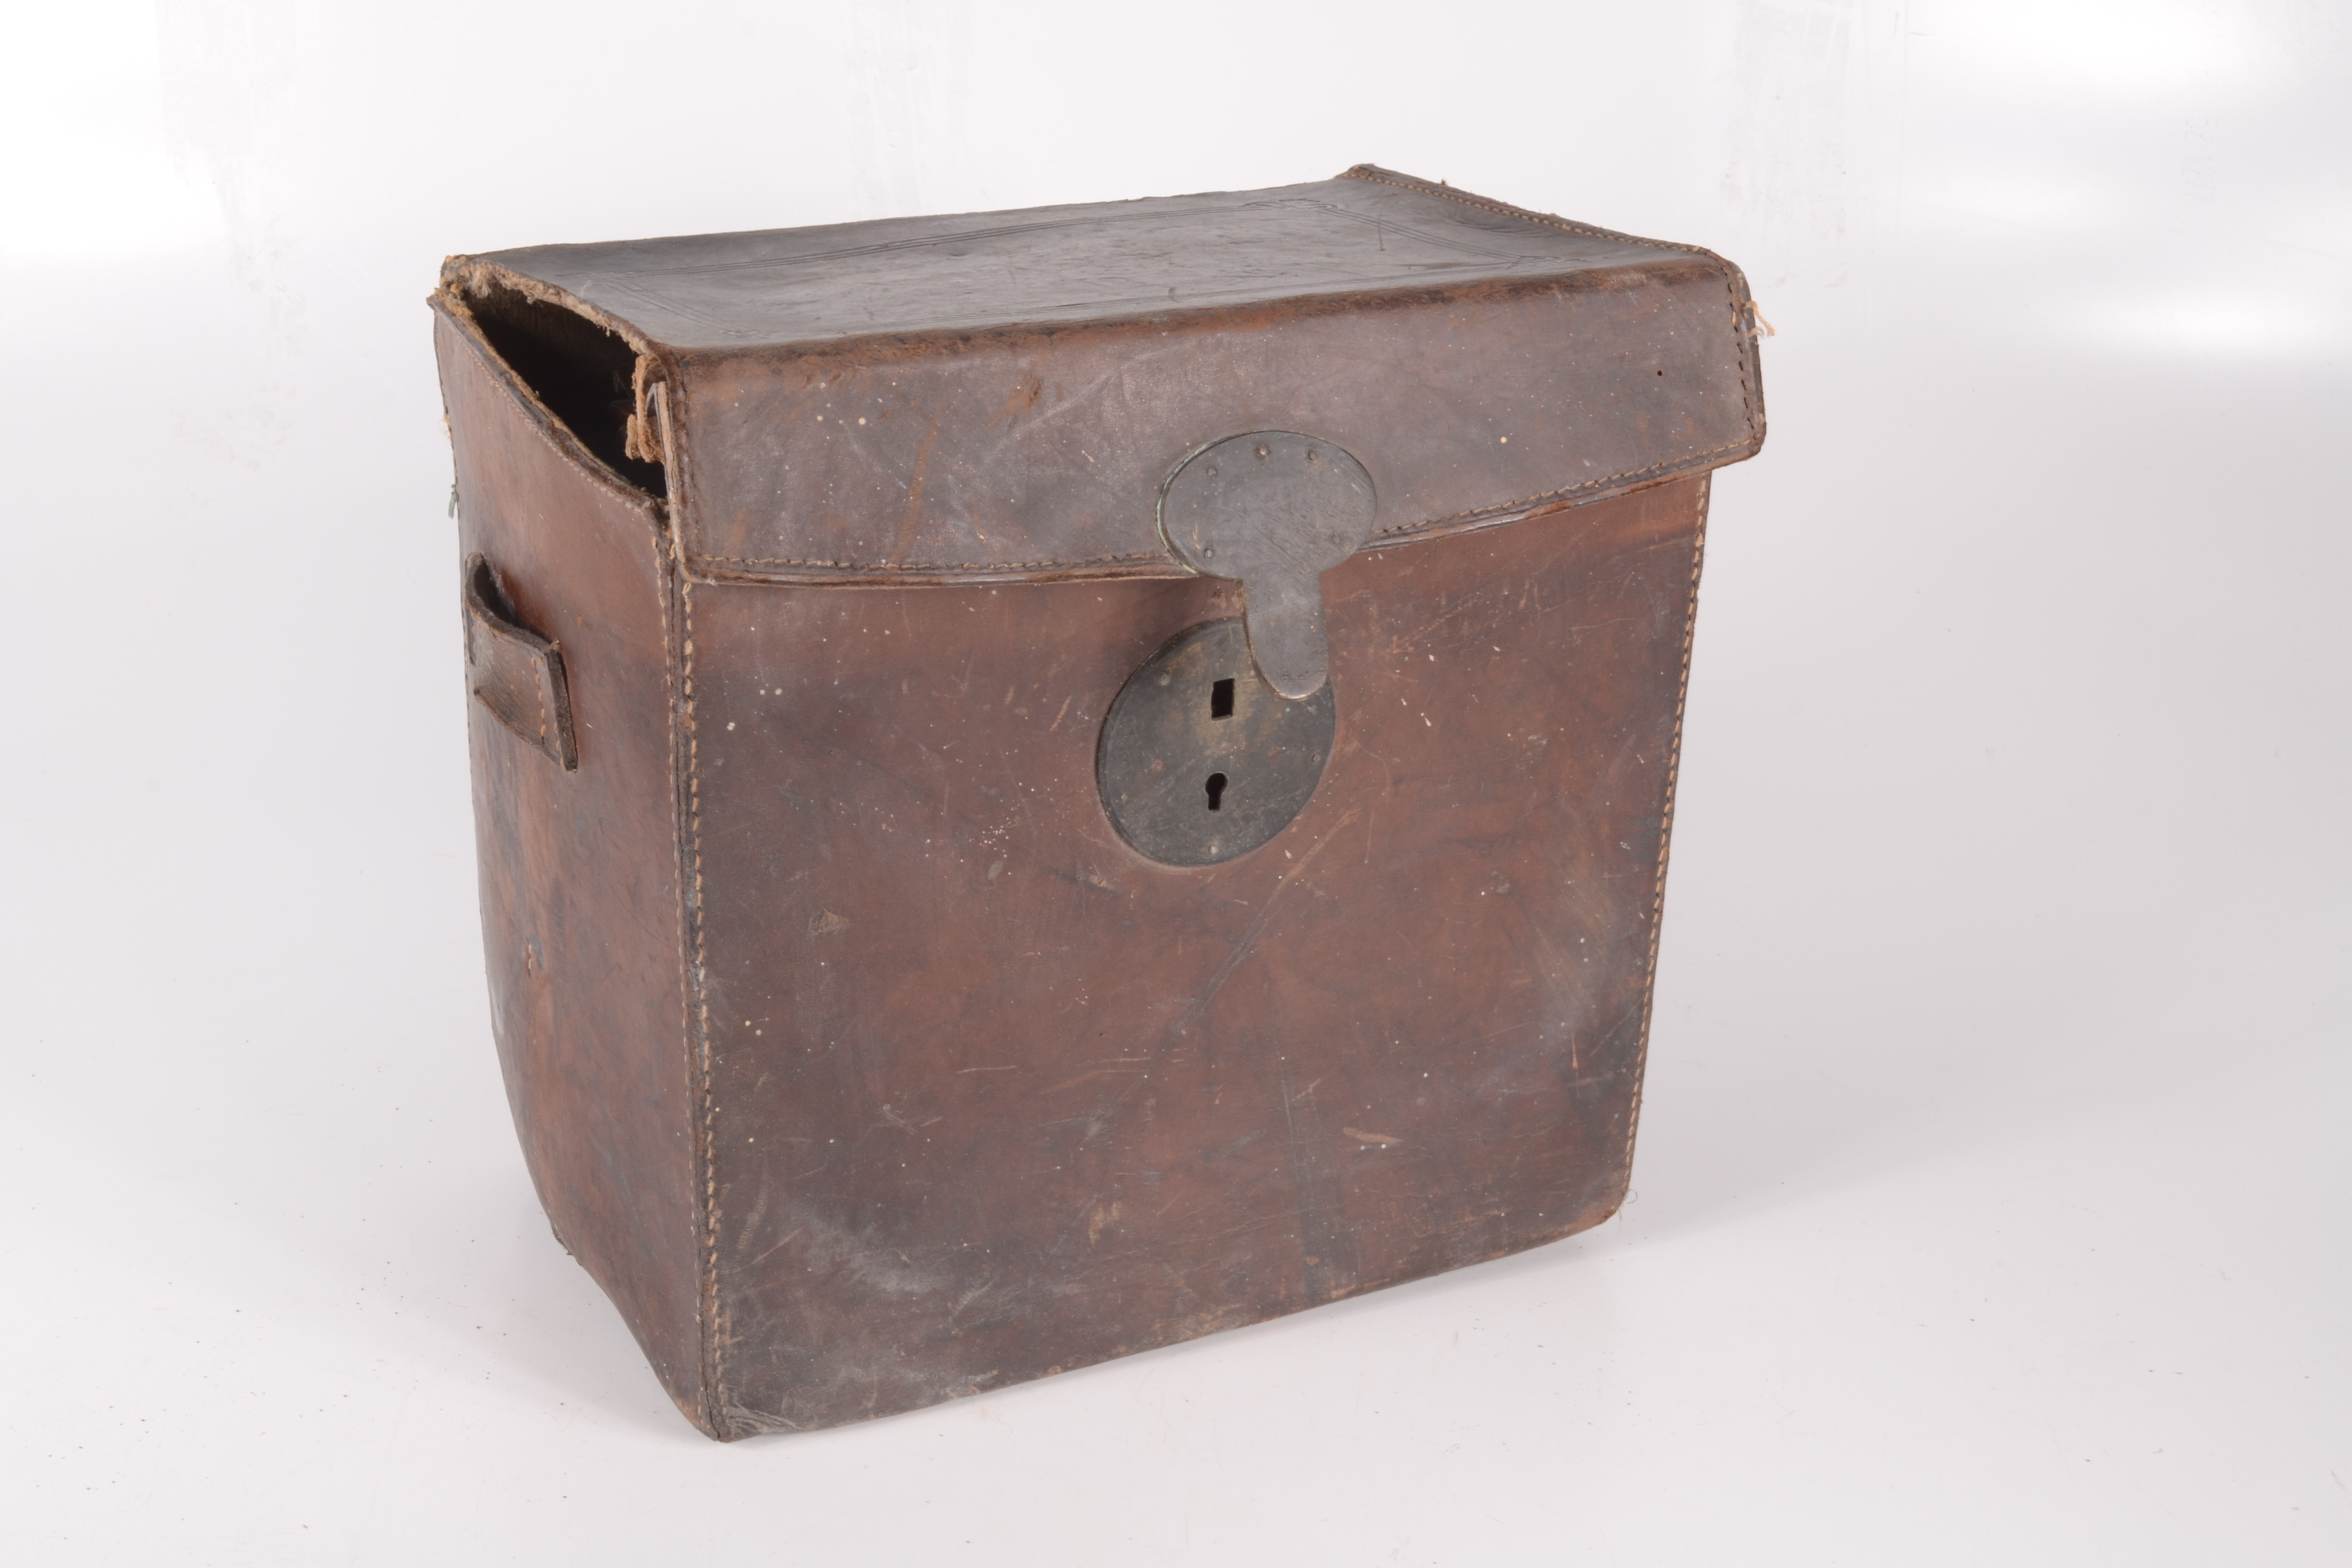 A Thornton Pickard Triple 'Imperial' Extension plate camera in a brown leather case, - Image 2 of 3